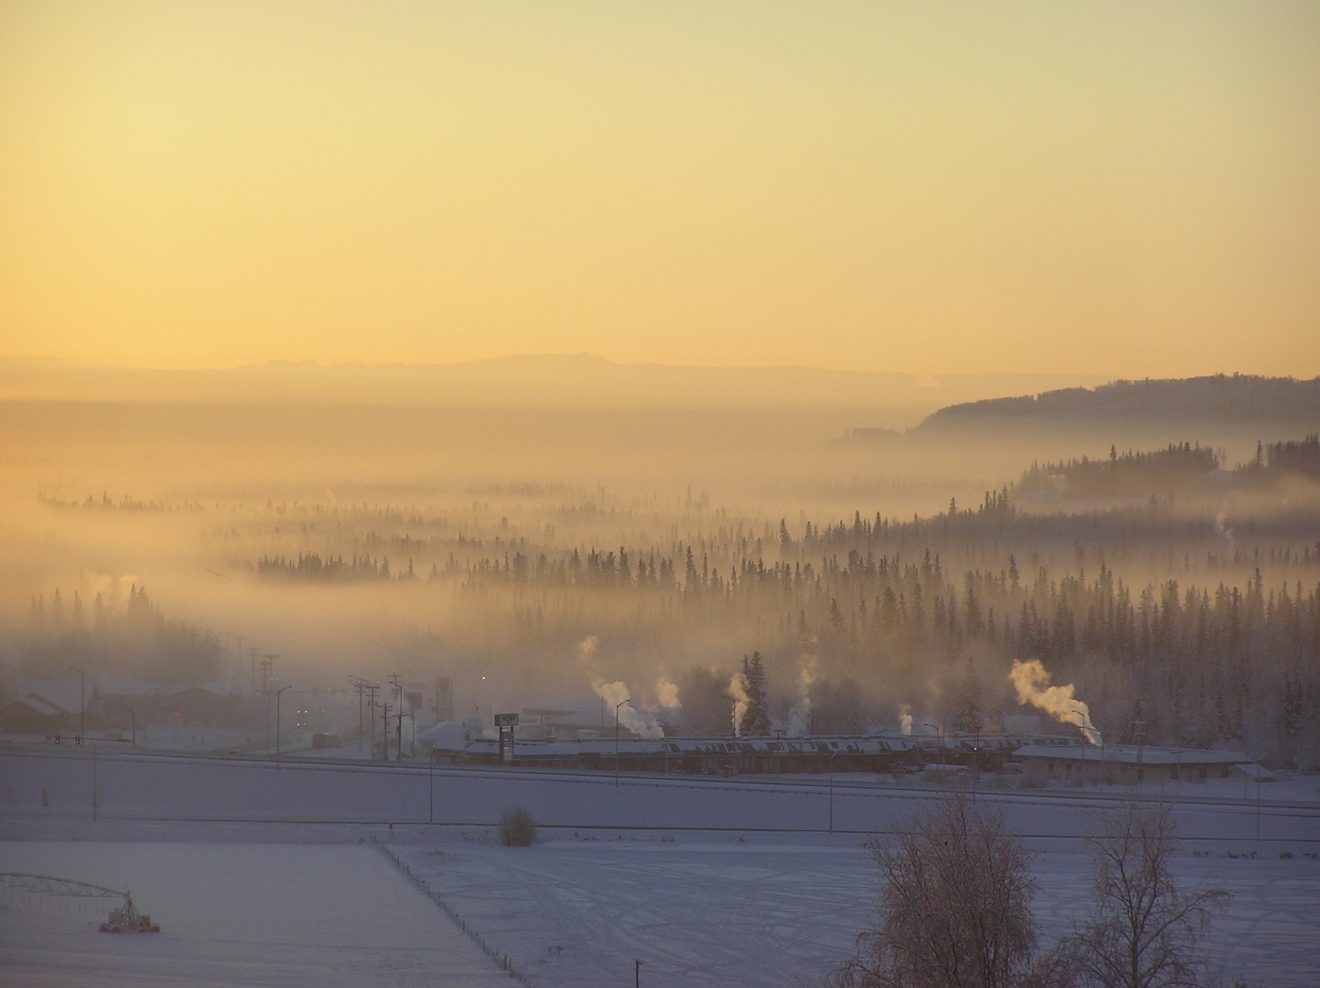 Research investigates chemical compound in Fairbanks winter air